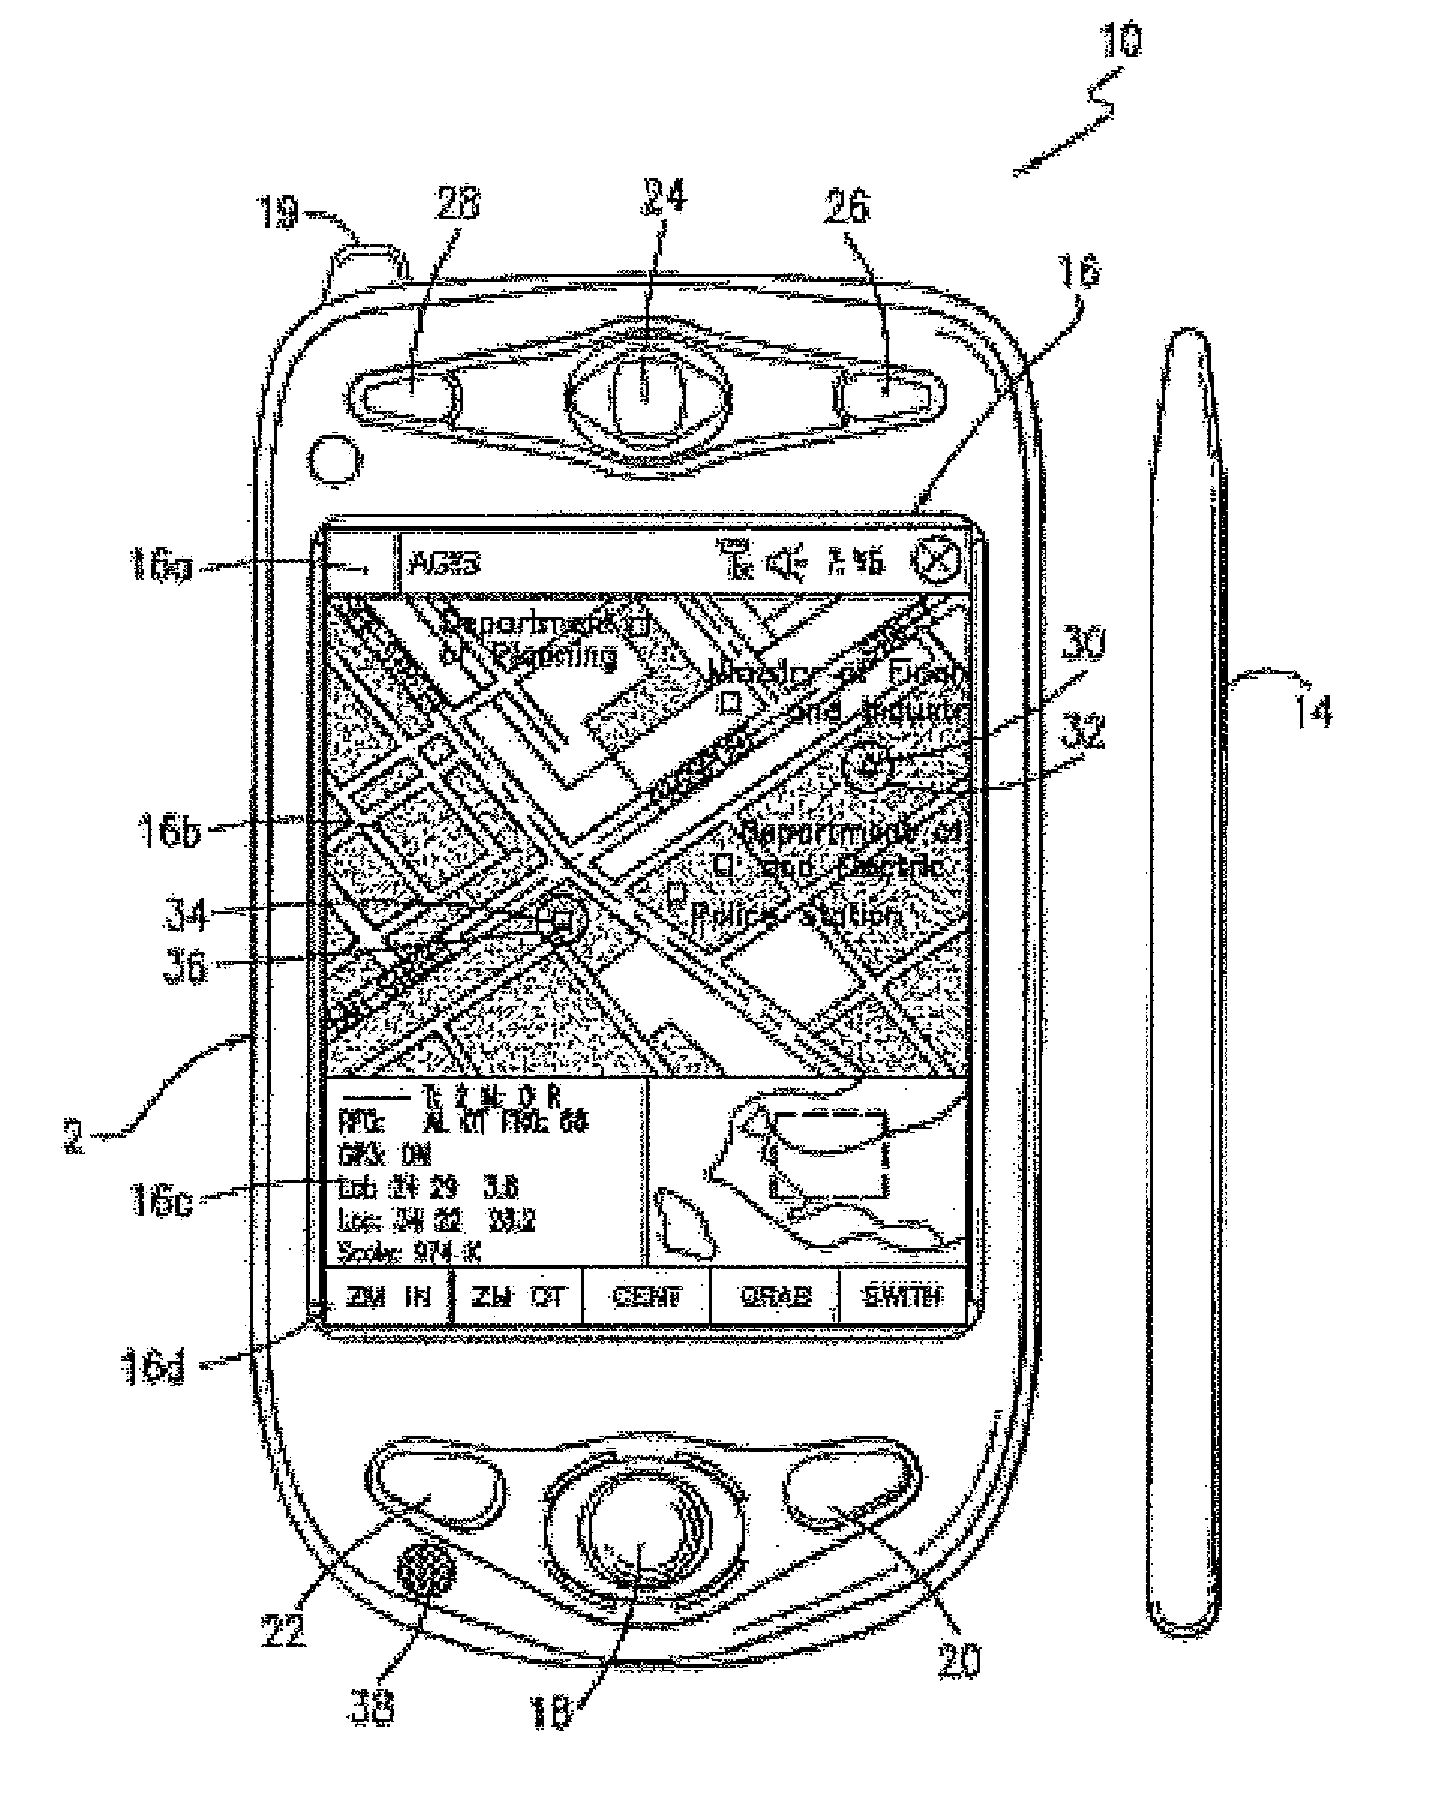 Method of utilizing forced alerts for interactive remote communications